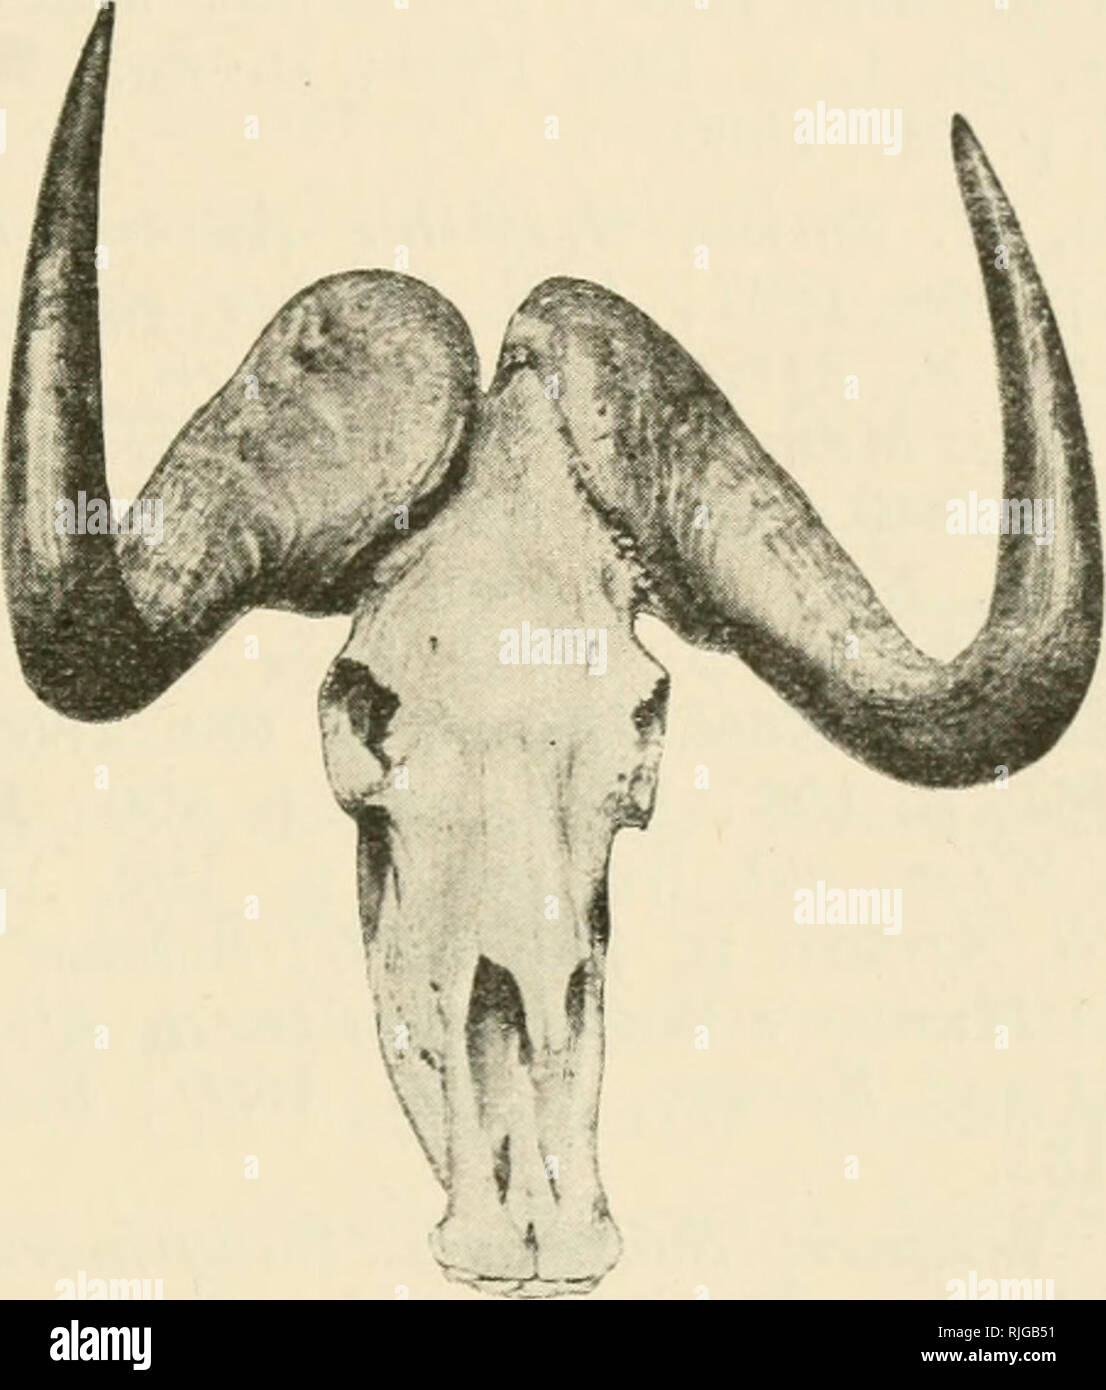 . Catalogue of the ungulate mammals in the British Museum (Natural History). British Museum (Natural History); Ungulates. BUBALIN.E 53 60.8.11.5. Head, mounted, and skull, young. S.Africa. Purchased, 1869. 50. 11. 22. 70. Skeleton, female. S. Africa. Skull, with horns, exhibited. Purchased, 1850. 59. 5. 6. 1. Skull, with horns. S. Africa. Length of horns 29} inches. Presented hy J. Butter, Esq., 1859. 58. 3. 17. 1. Skull, with horns. S. Africa. Purchased, 1858. 48. 6. 28. 2. Skull, with horns. S. Africa. Pitrchased (Stevens), 1848.. Fig. 9.—Skull and Horns of Gnu {Connochcetes gnu). 48. 8. 29. Stock Photo